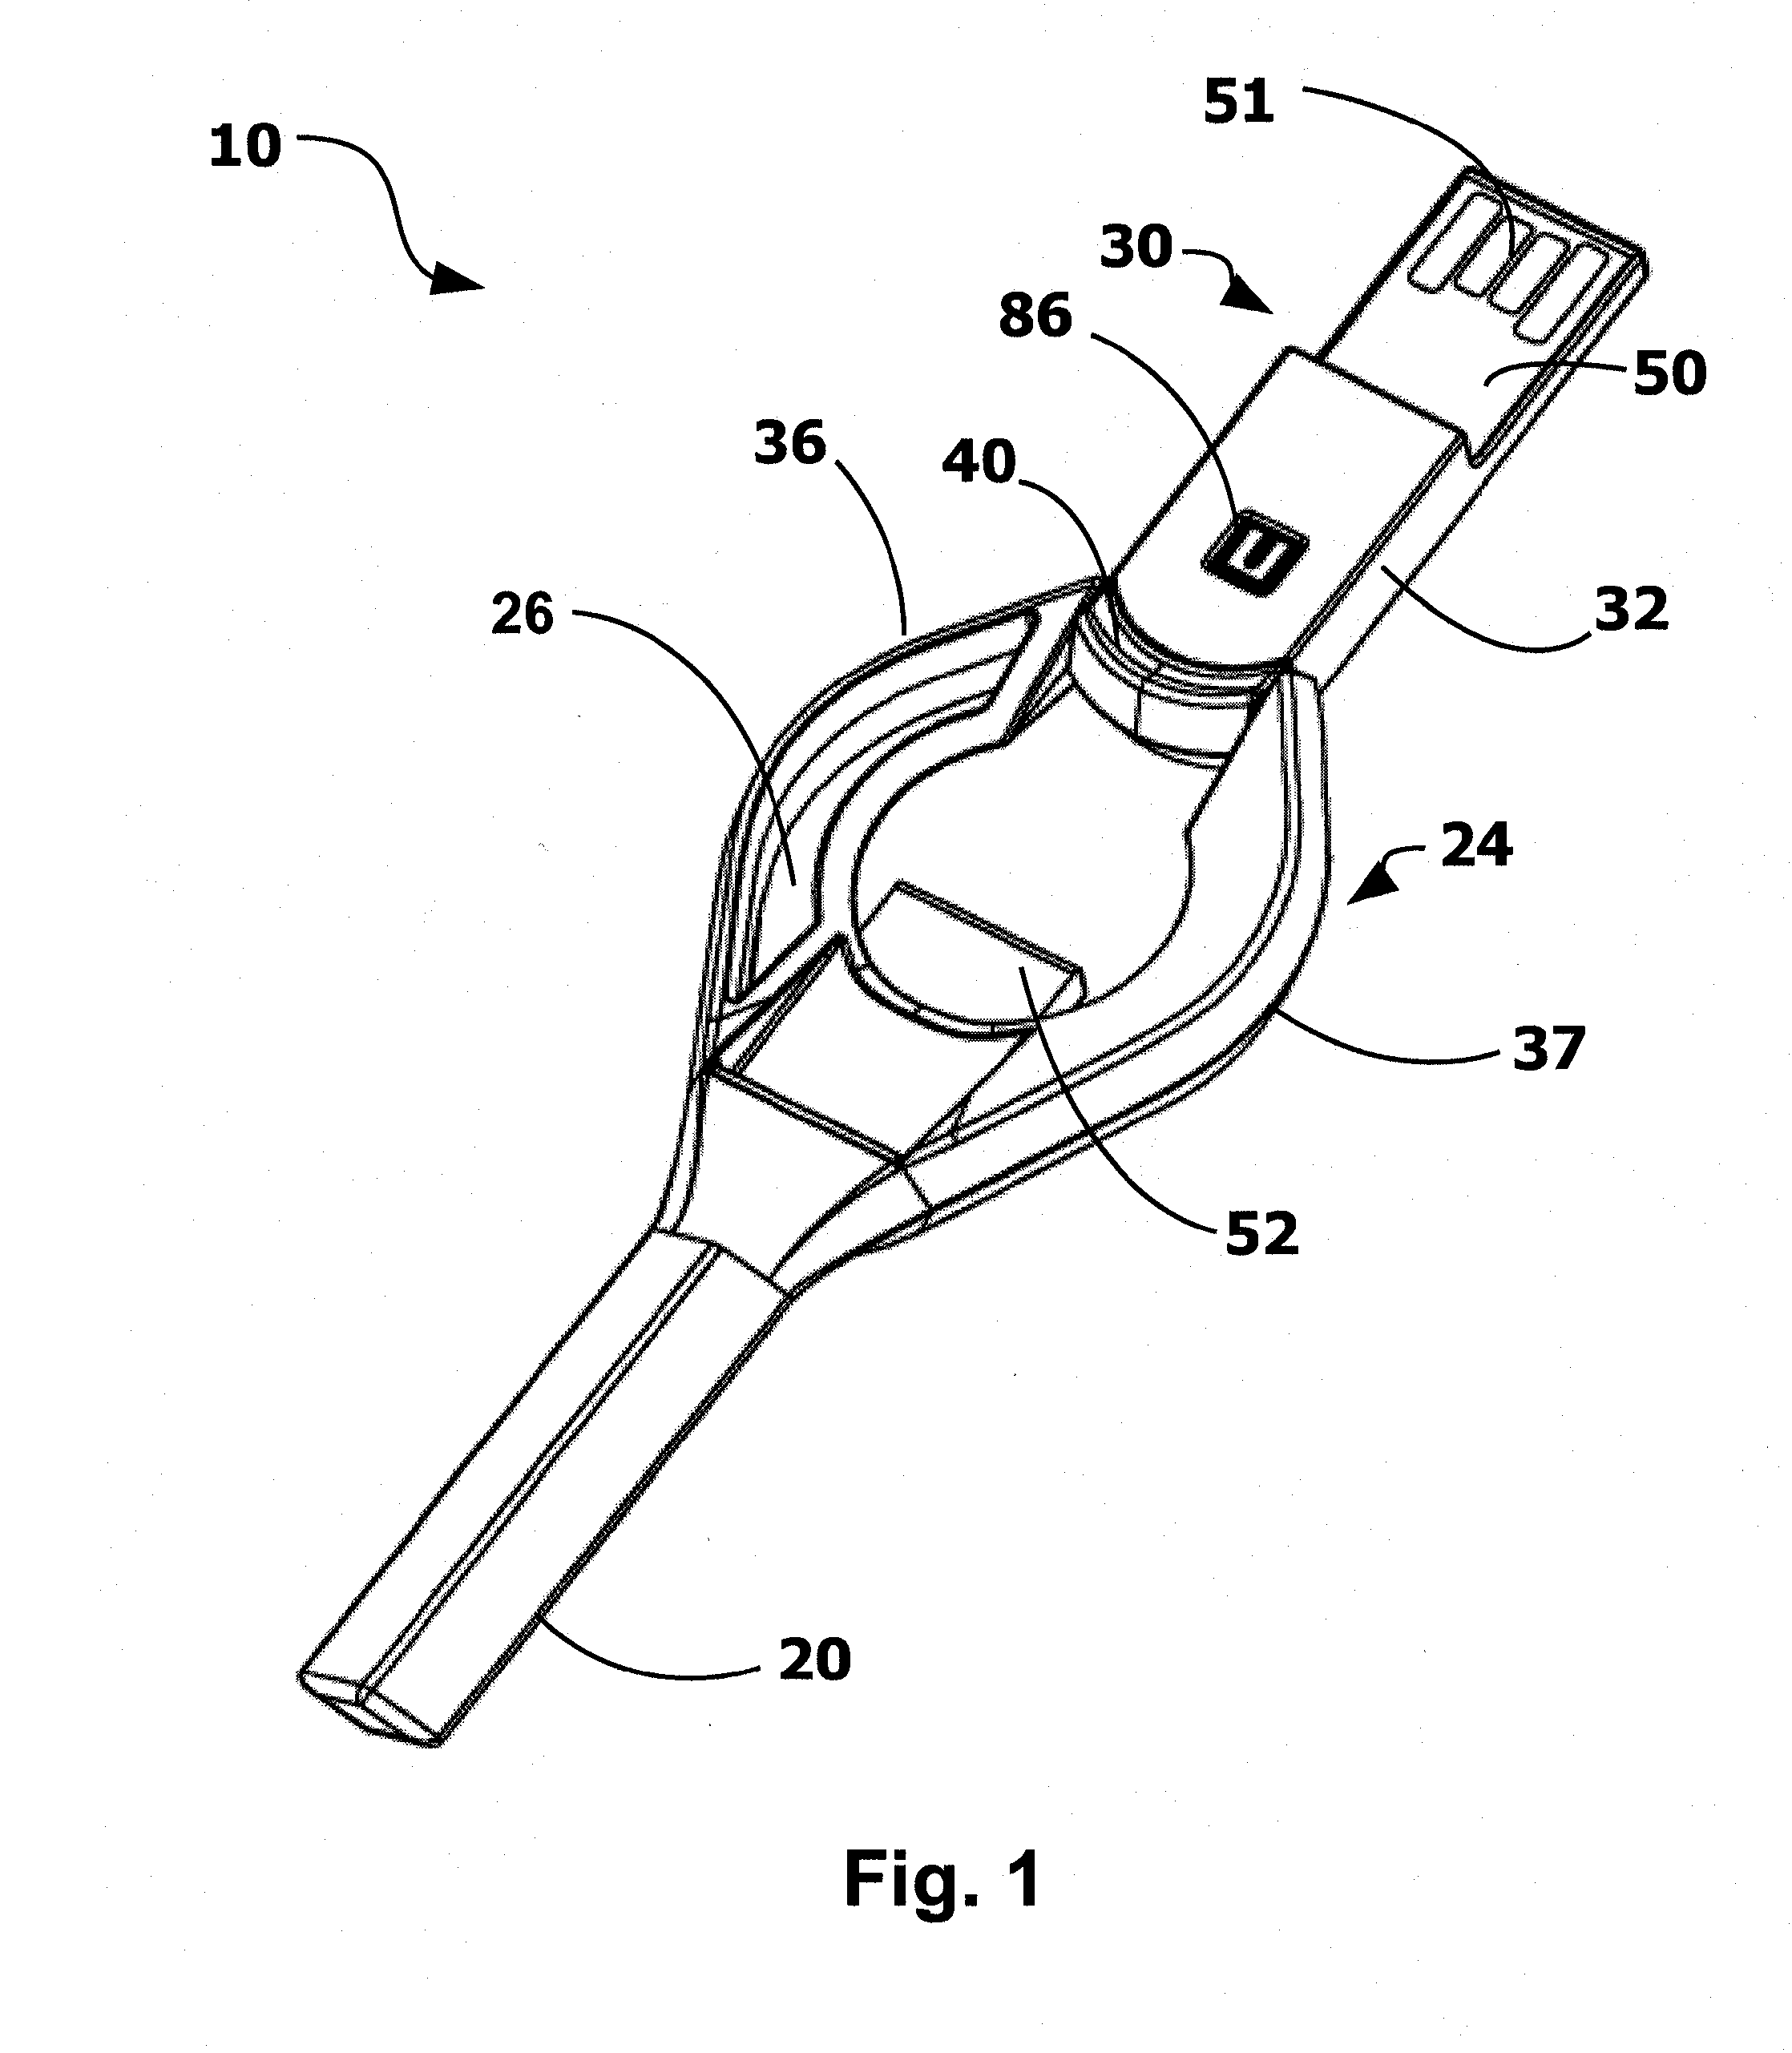 A portable electronic device integrated with a key